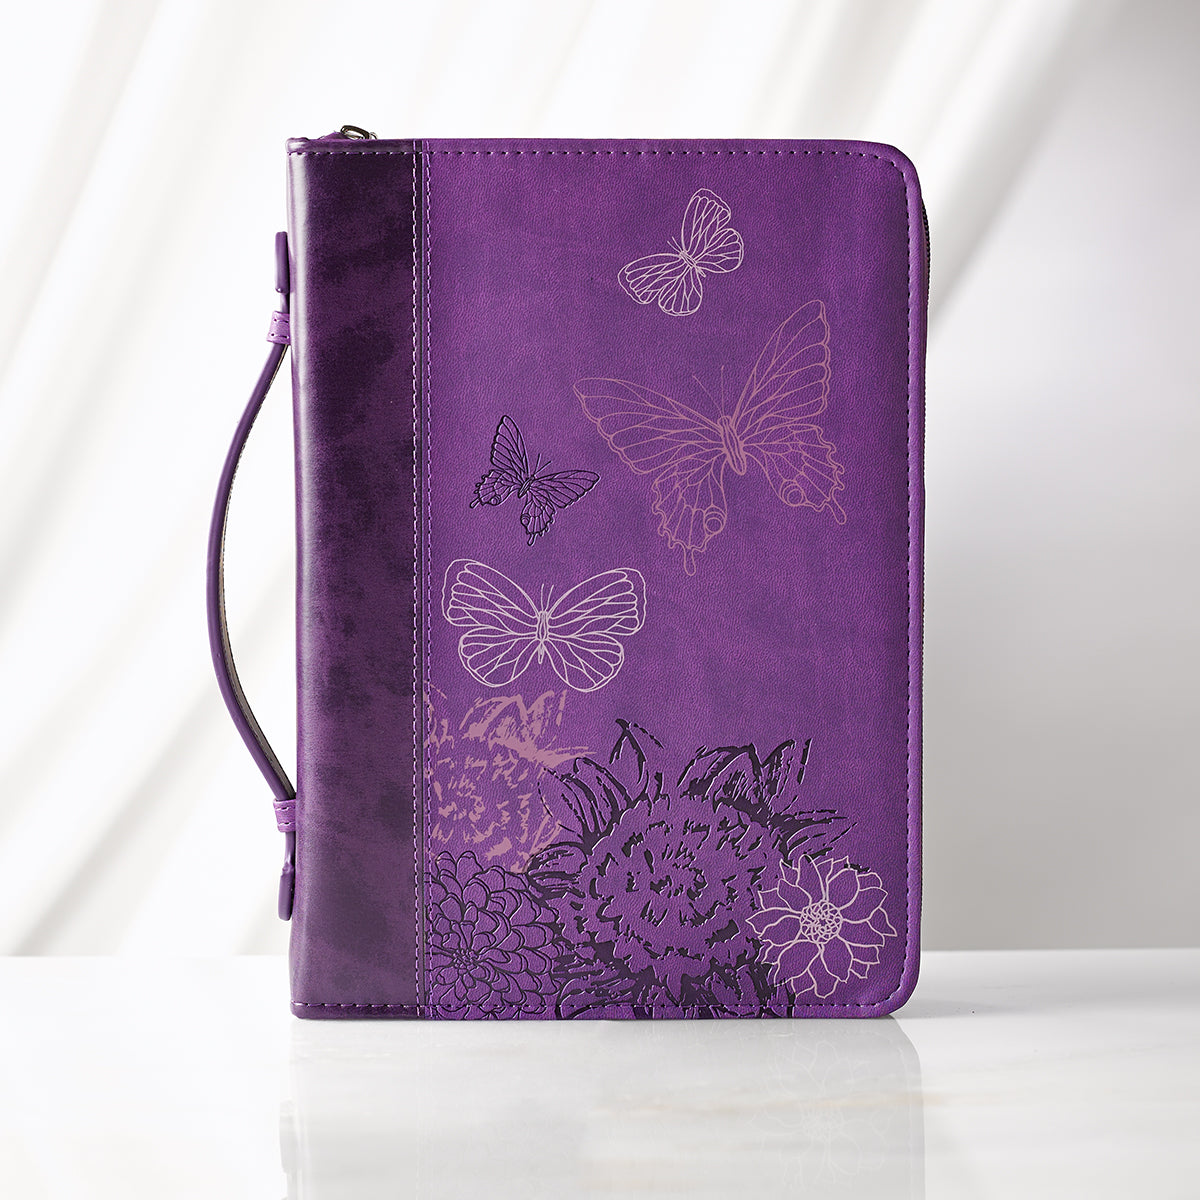 New Creation Purple Butterflies Faux Leather Fashion Bible Cover - 2 Corinthians 5:17 - The Christian Gift Company